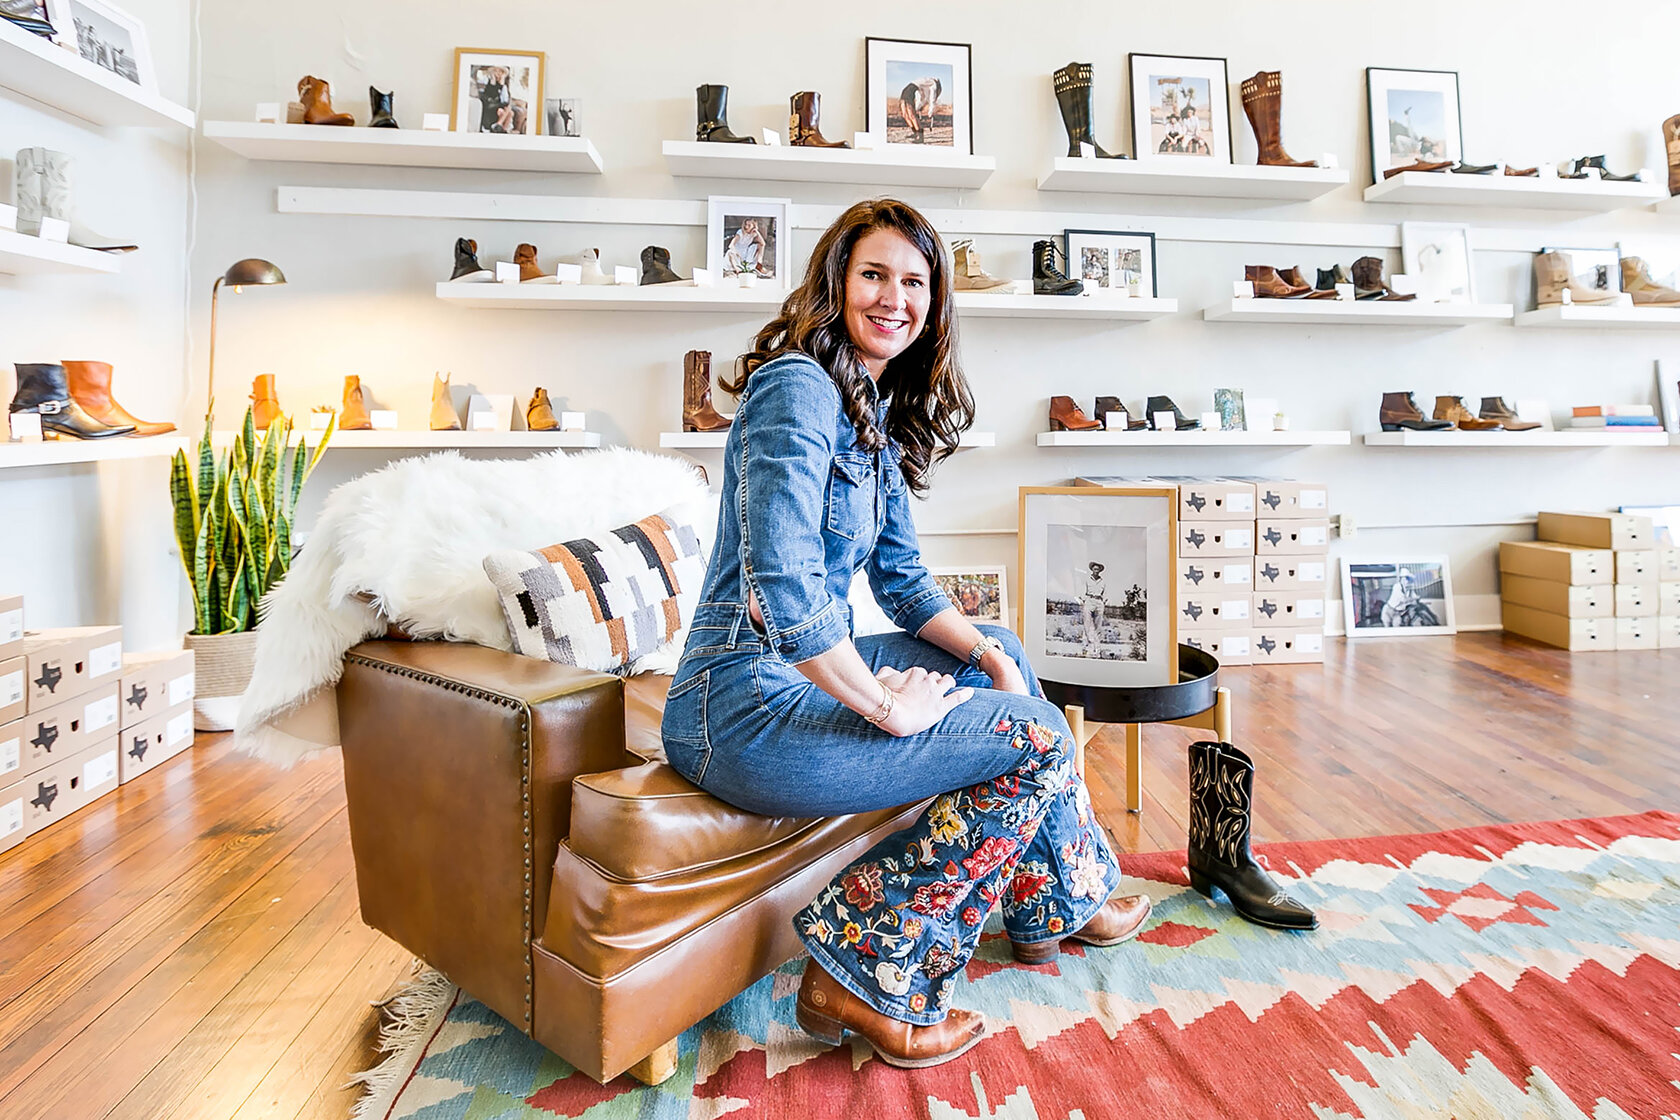 Founder of Ranch Road Boots, Sarah Ford